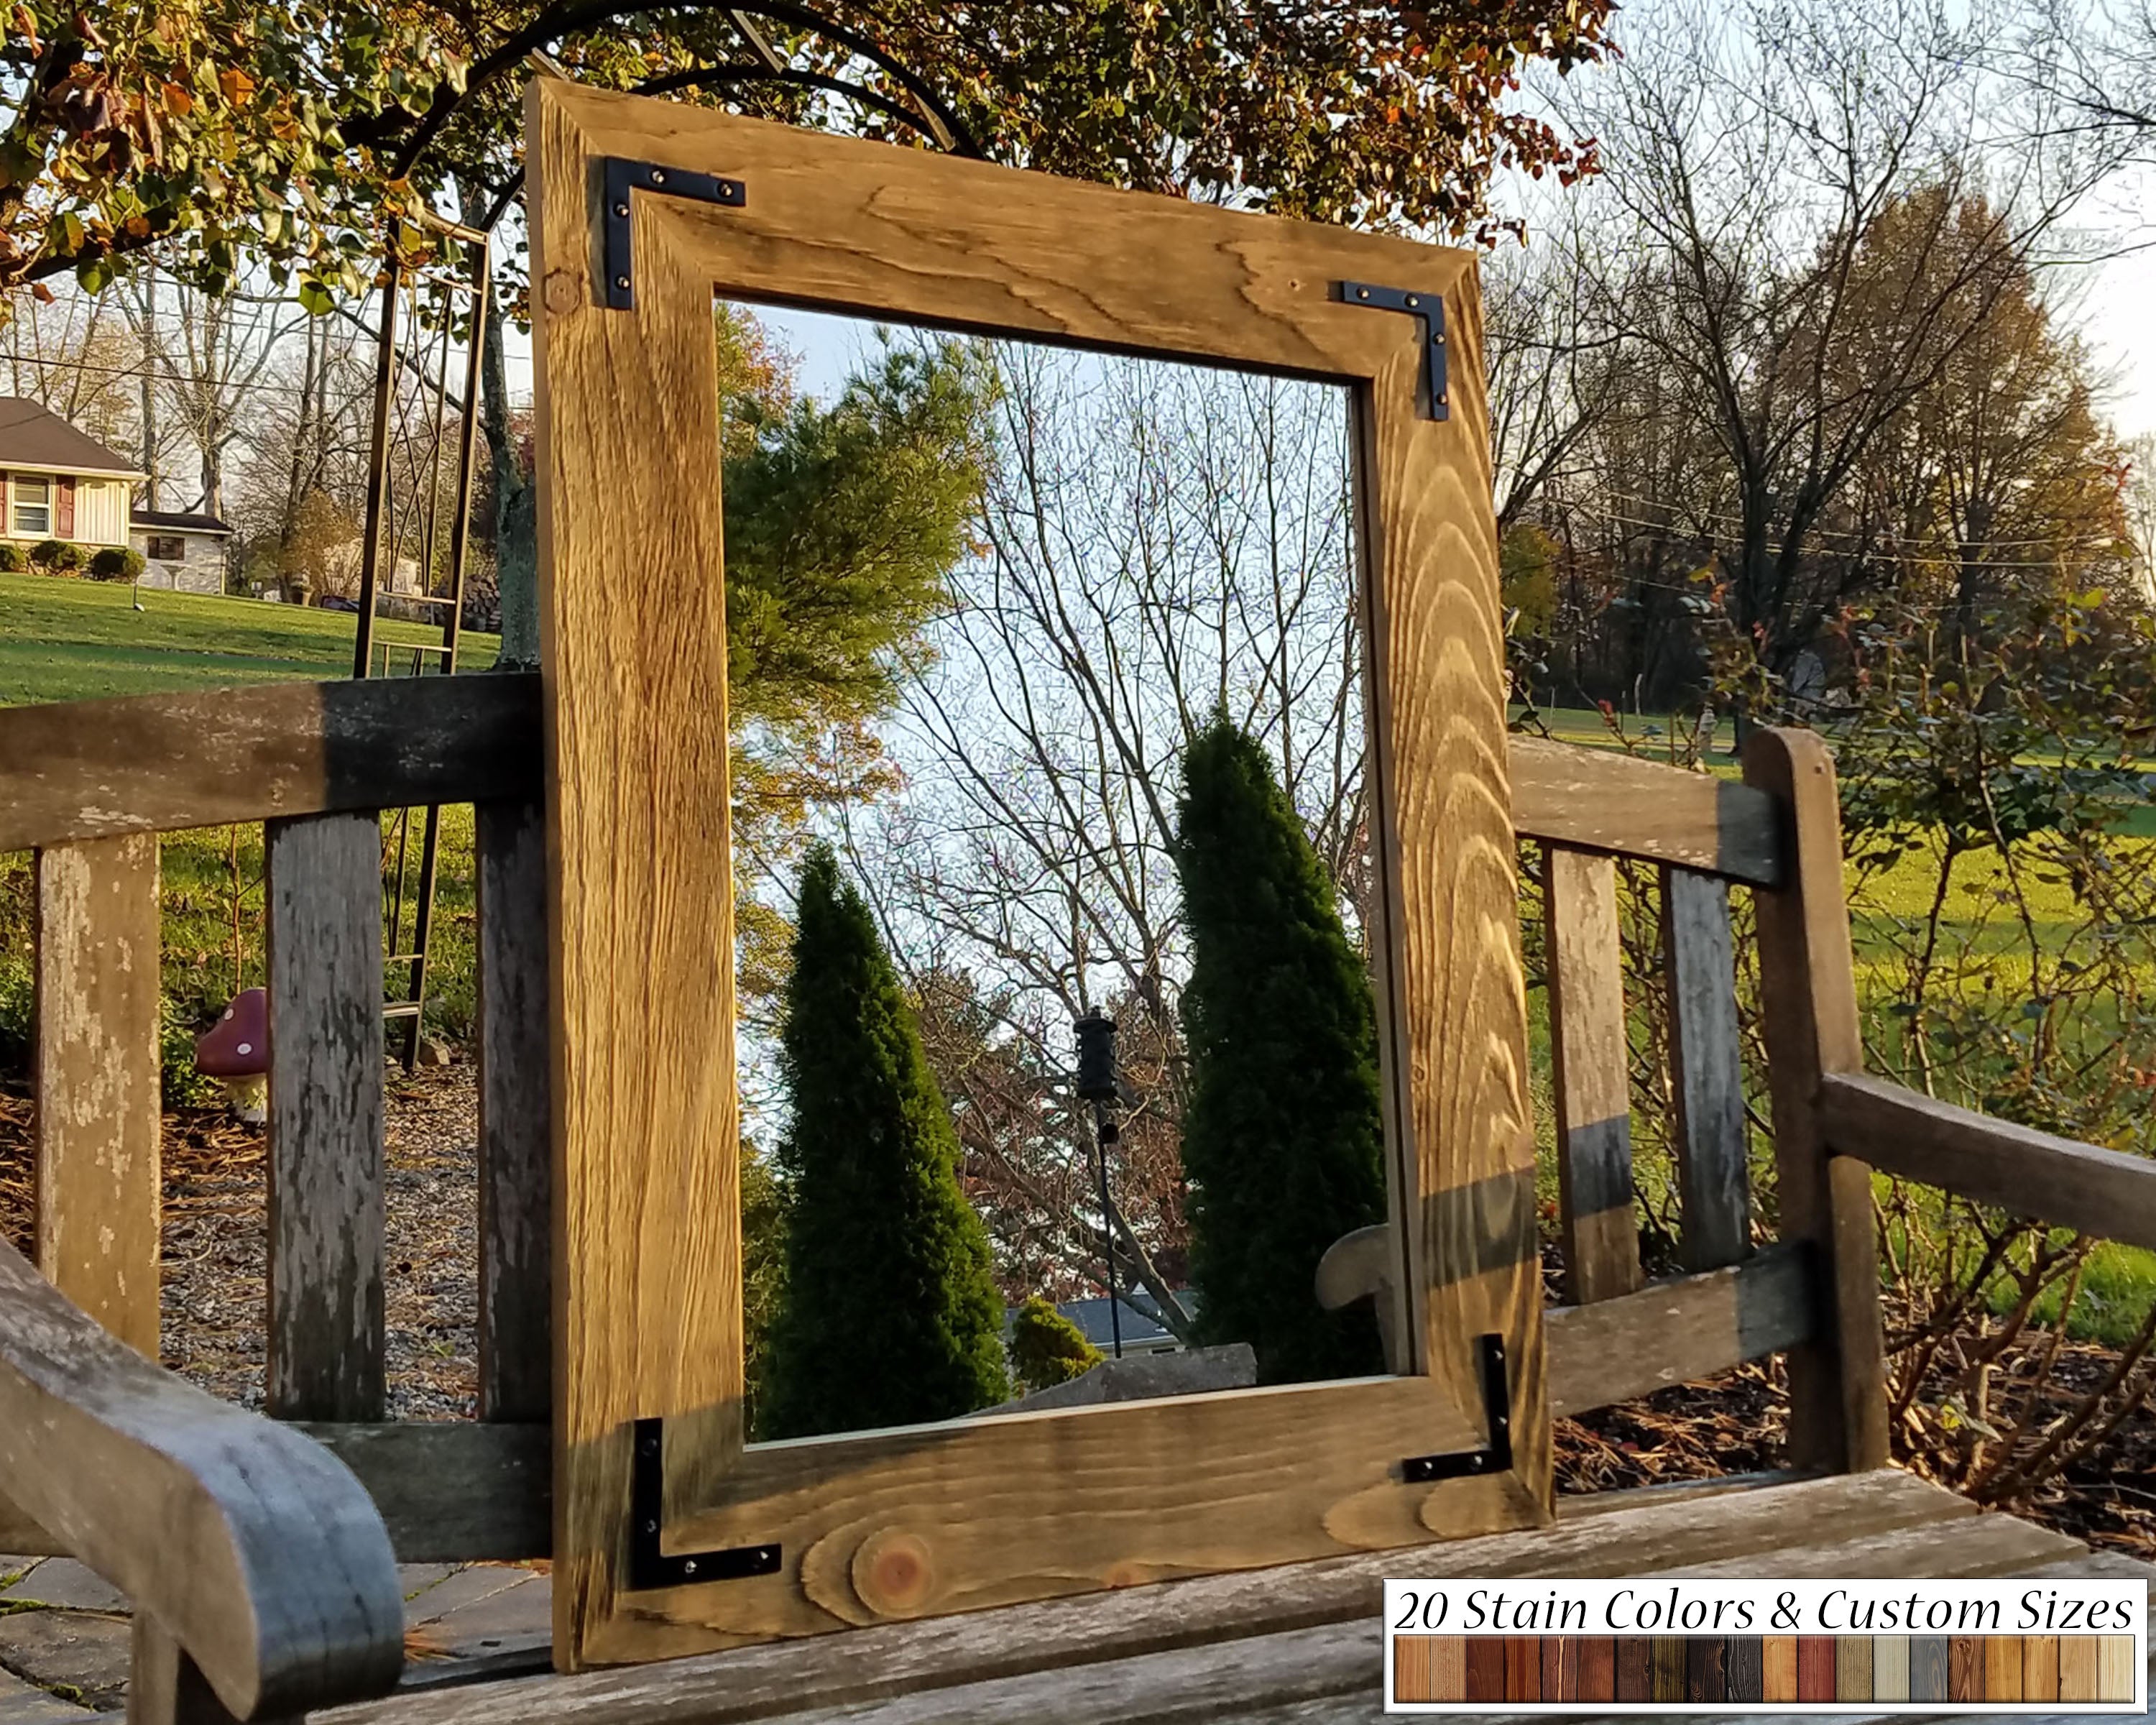 Accent Bracket Shiplap Rustic Framed Wall Mirror, 20 Colors, & Custom Sizes by Lane of Lenore